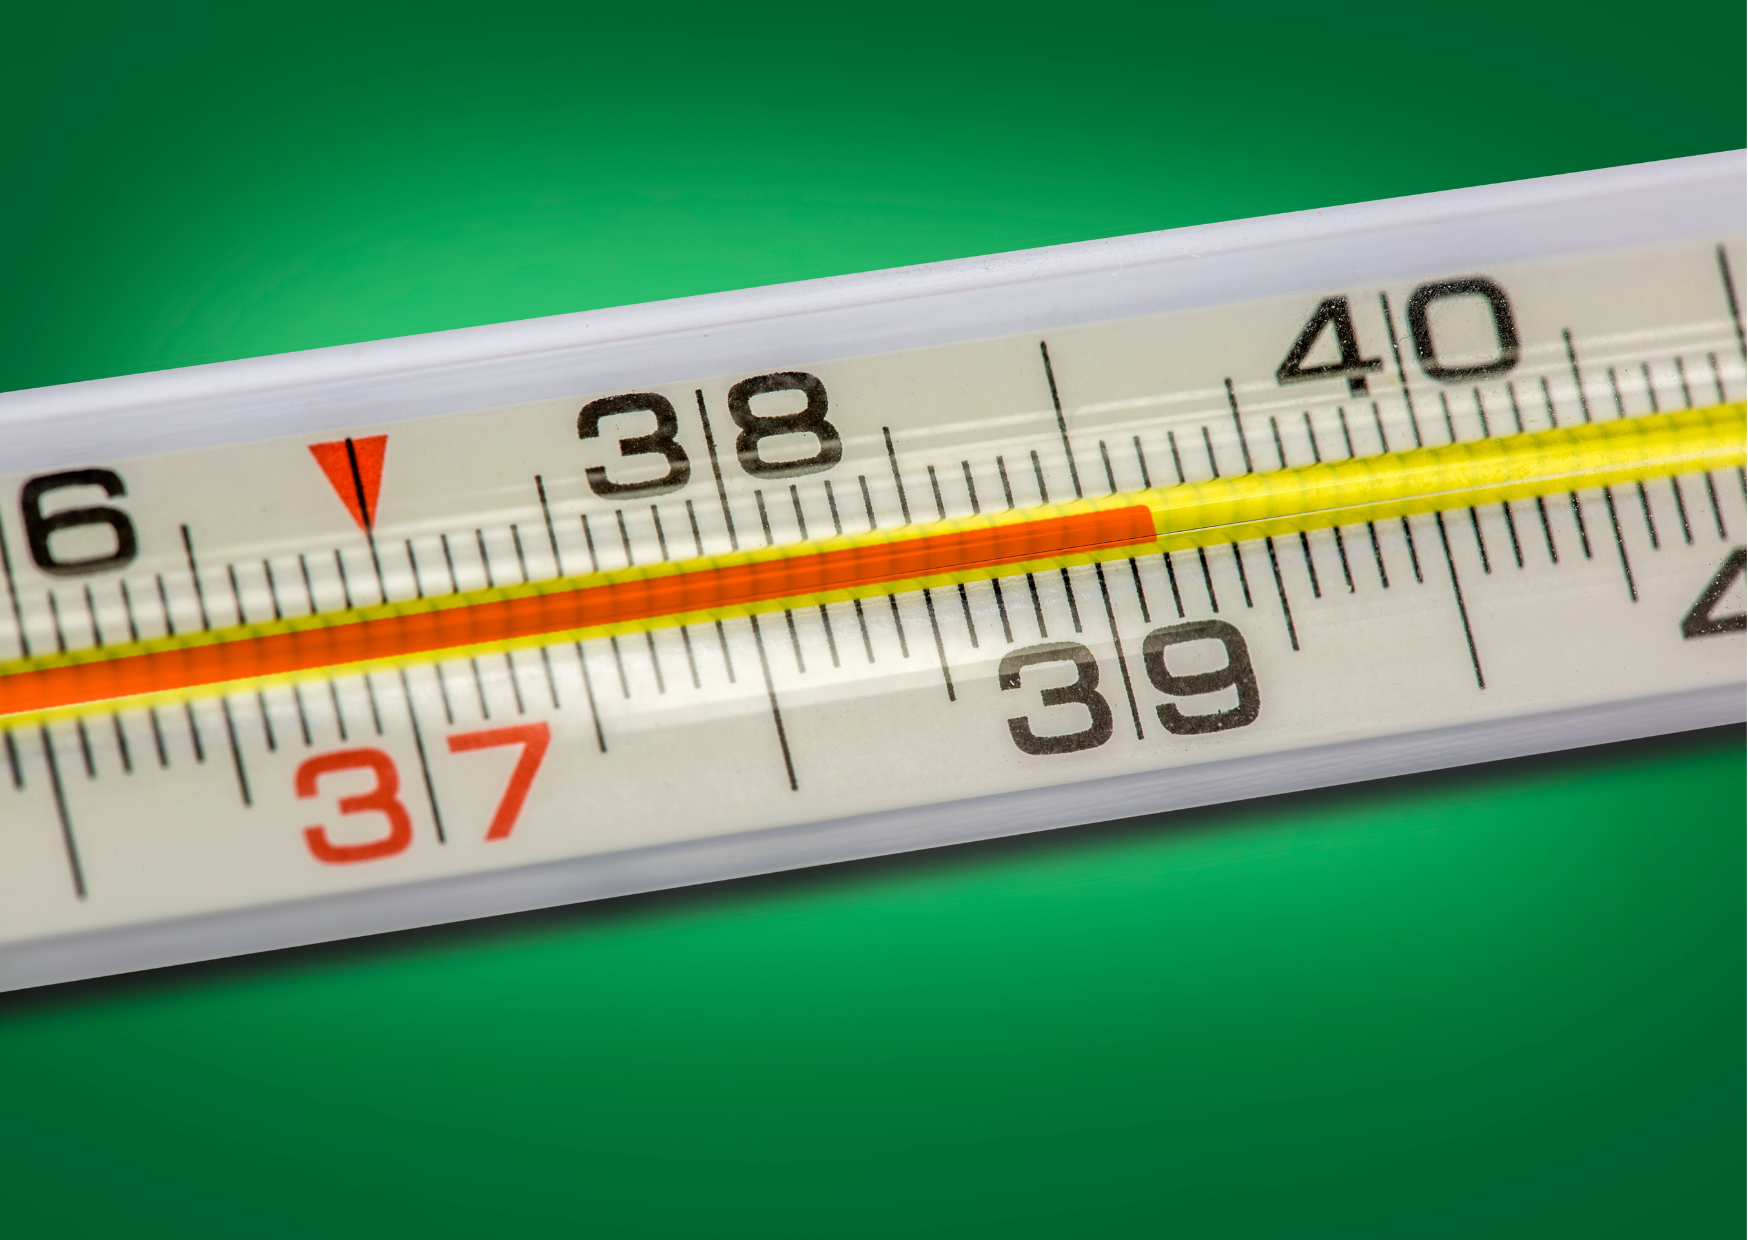 What ways can you measure temperature?